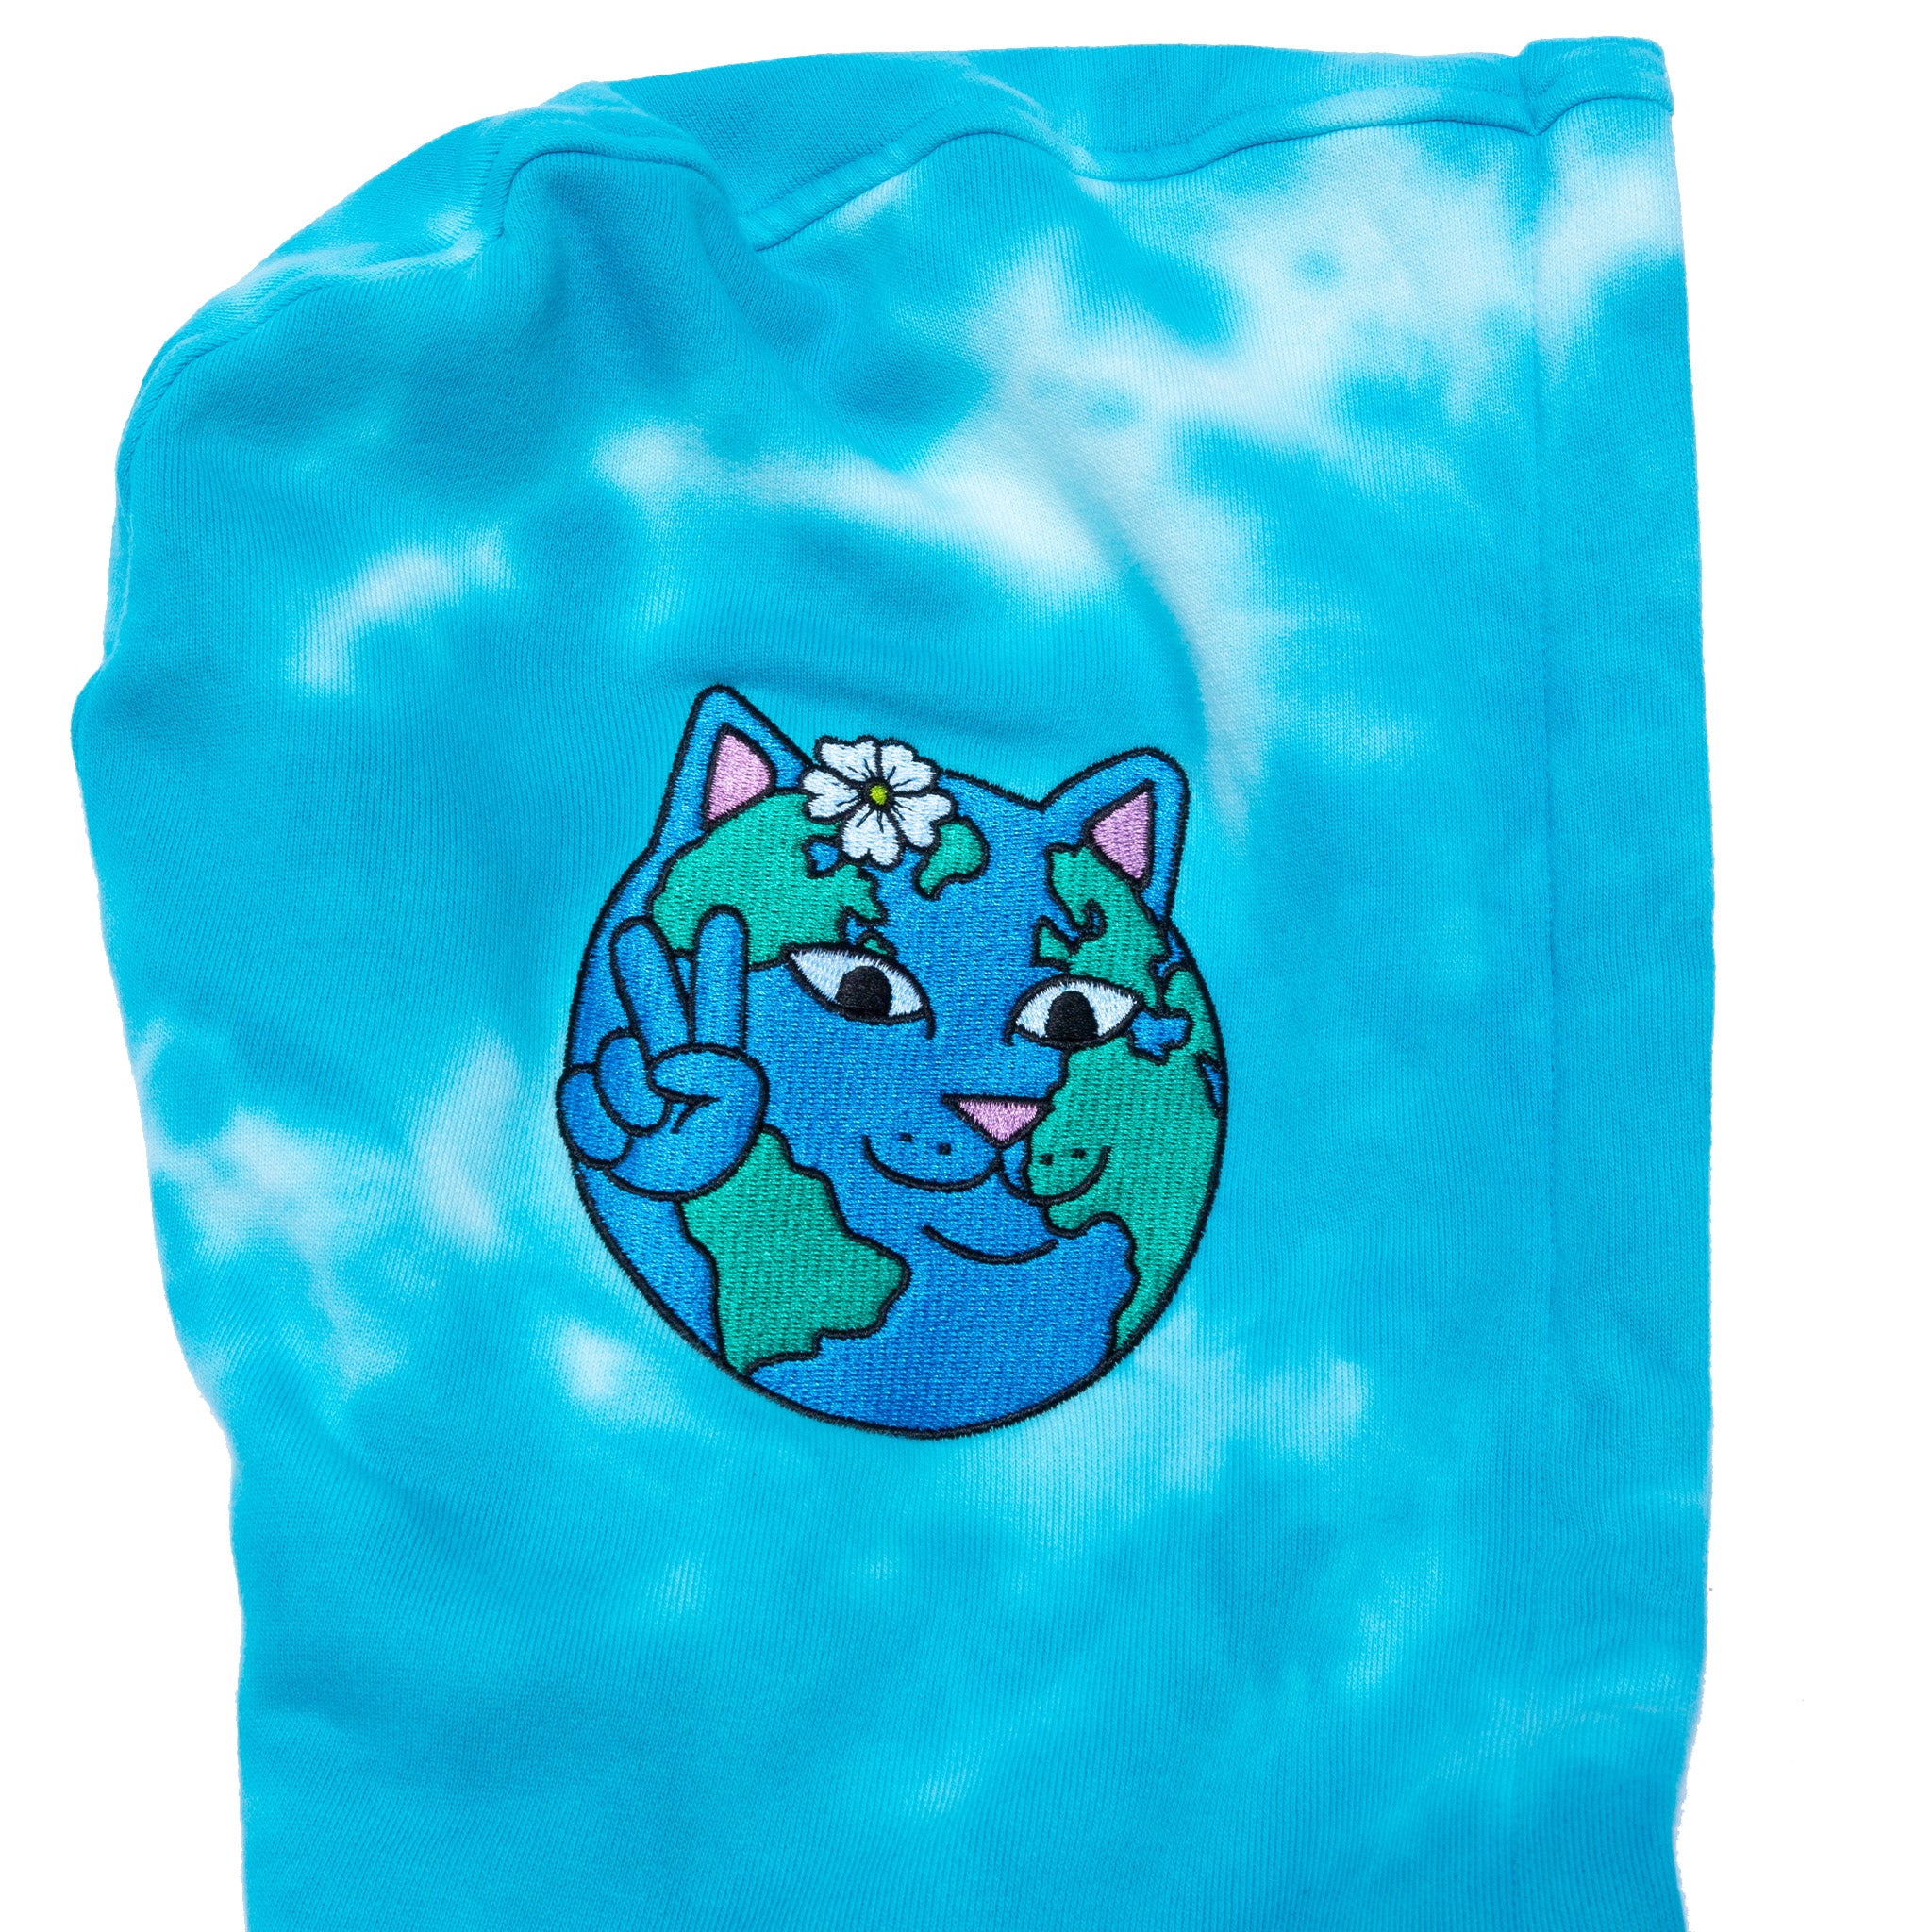 Save the World Embroidered Hoodie (Aqua/Green Tie Dye)